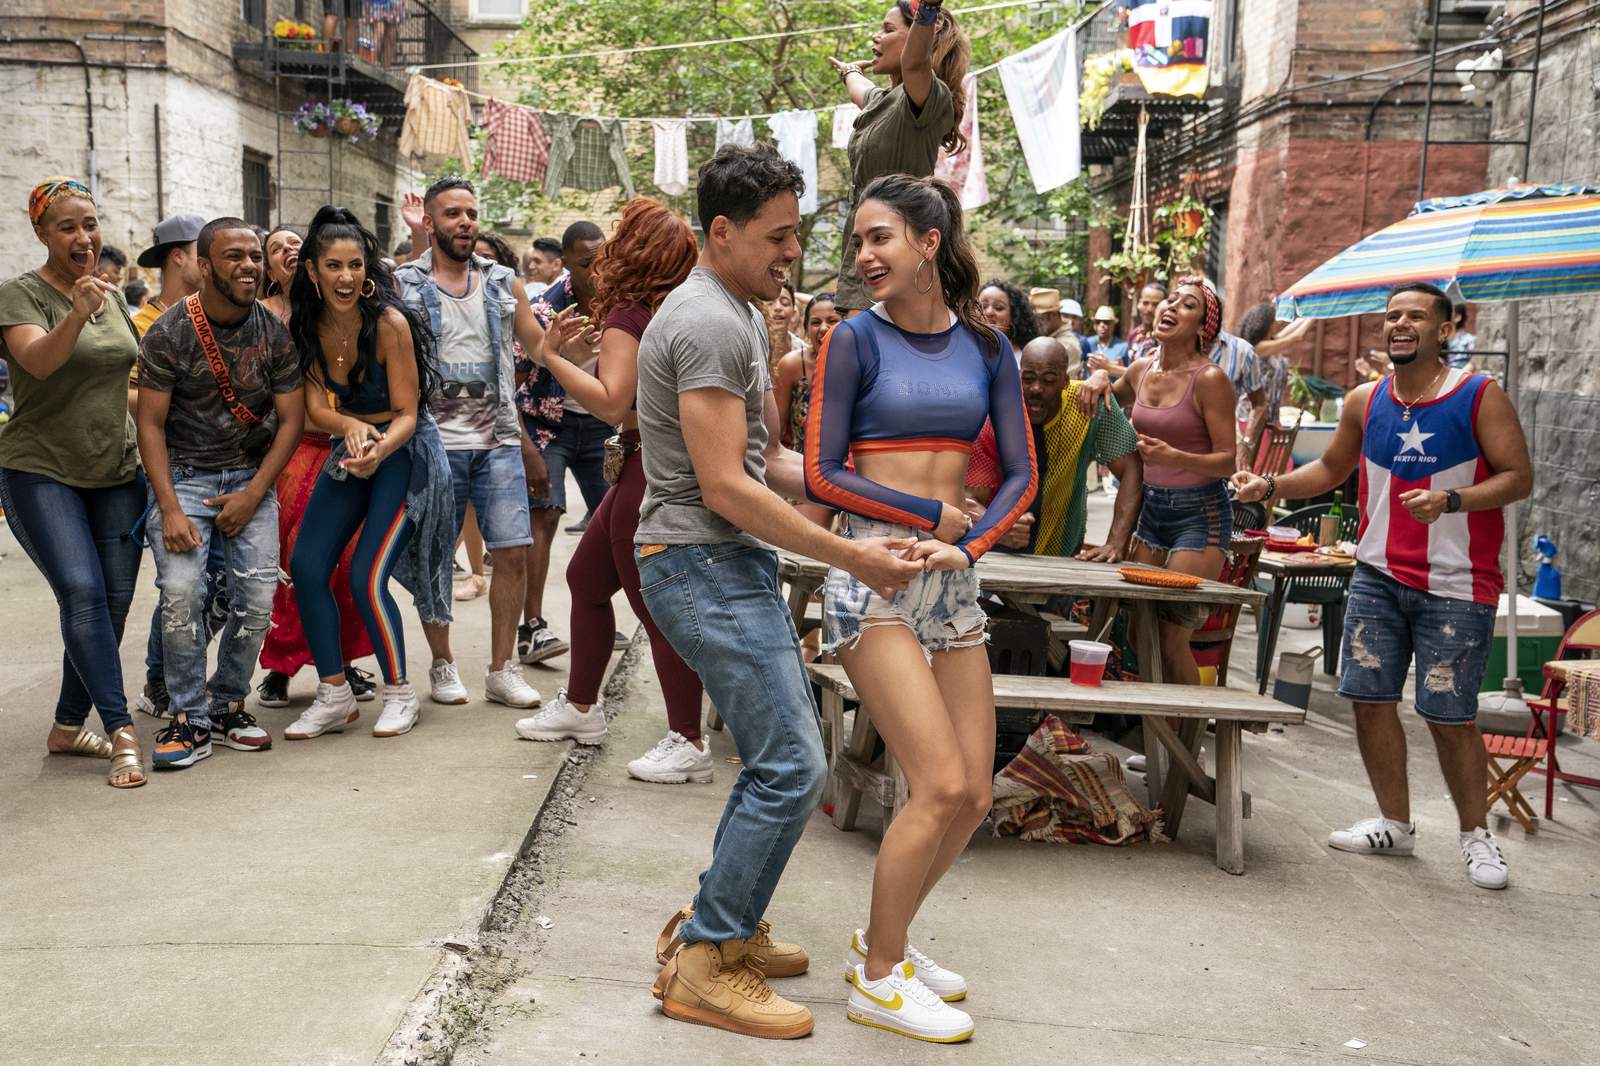 ‘In the Heights’ to open Tribeca Film Festival in June